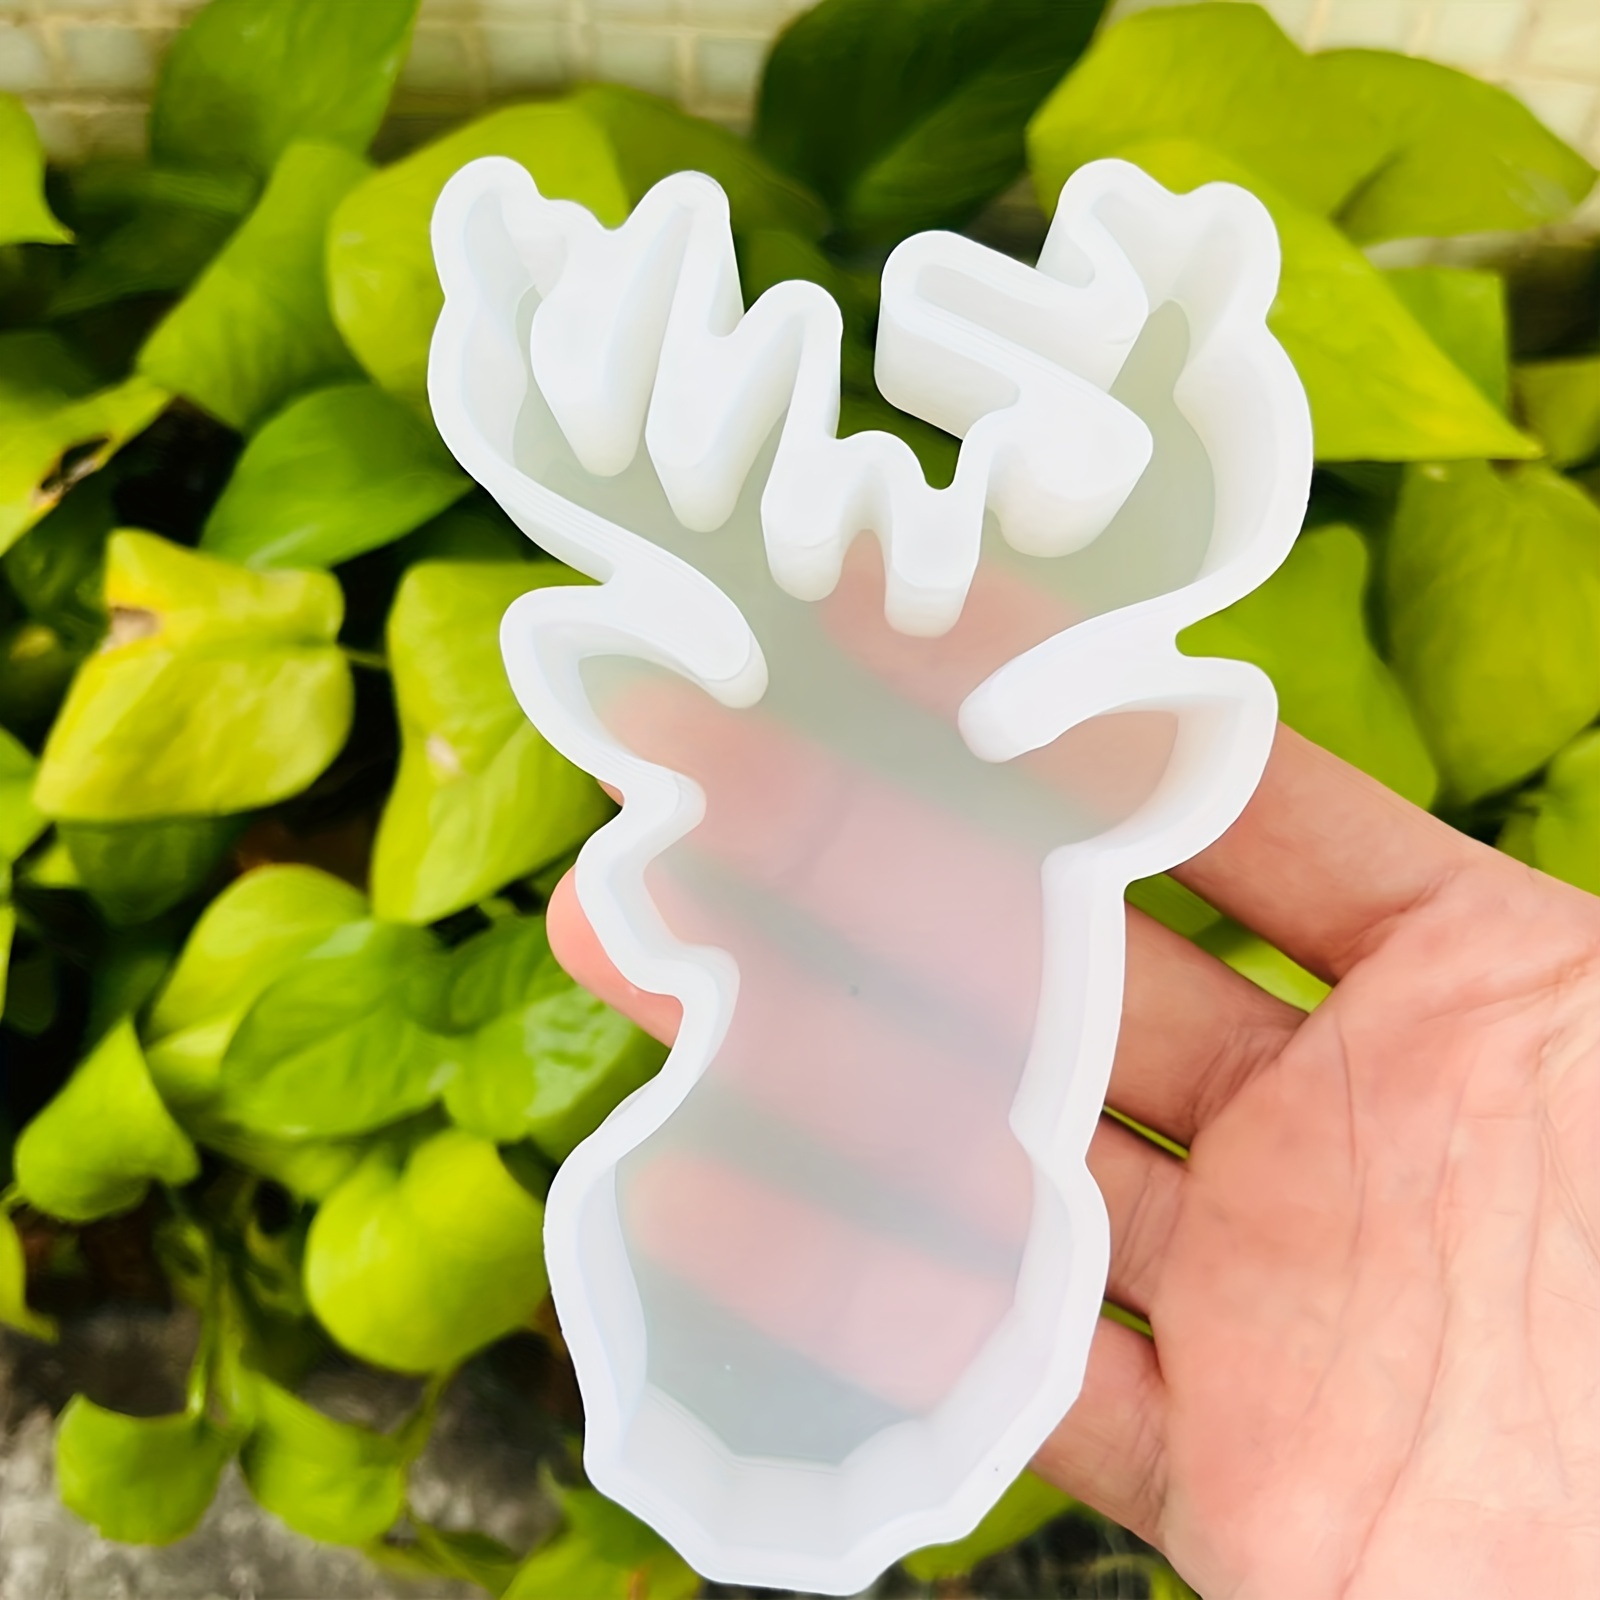 White Deer Molds Silicone Freshie Molds Silicone 9.8*9*3.1 Cm Car